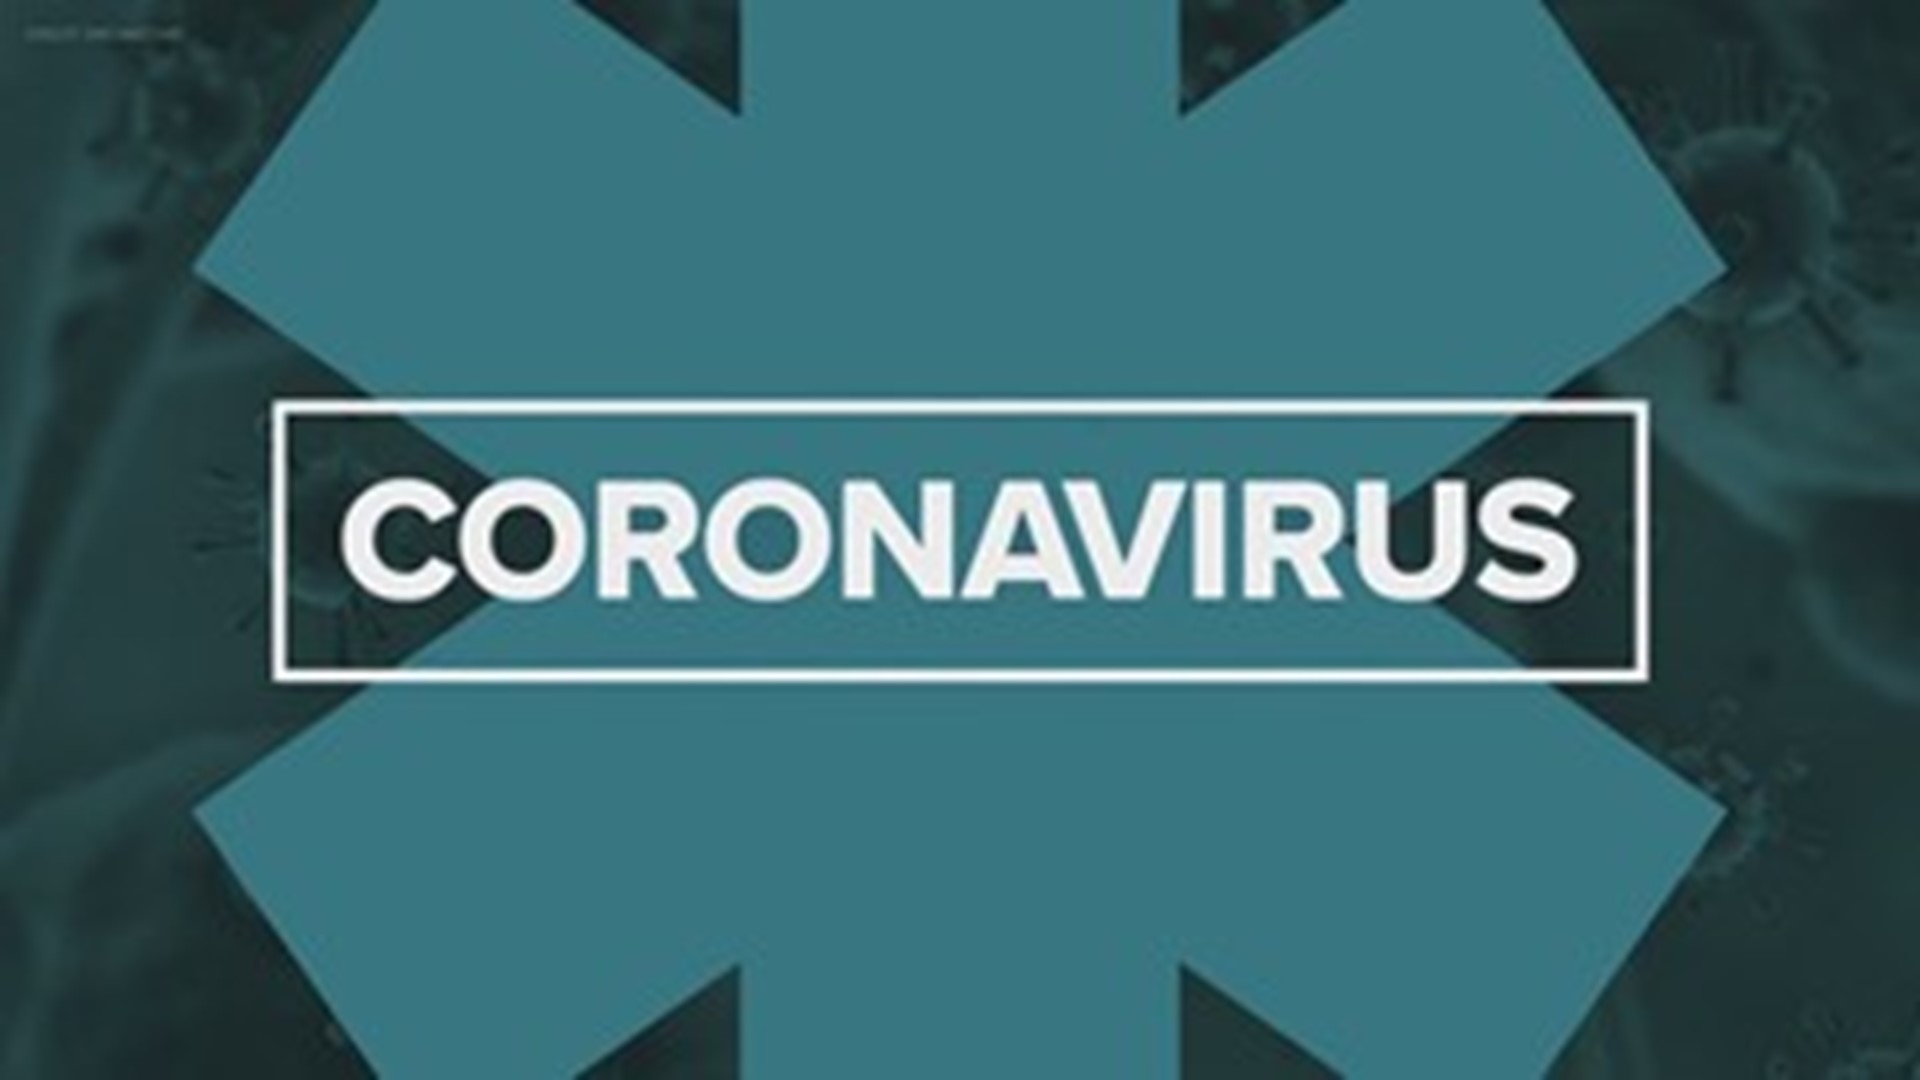 Indiana coronavirus updates: Hospitals feeling some relief in pandemic, shipment delays force 2 VAs to cancel clinics, Pfizer testing vaccine in pregnant women